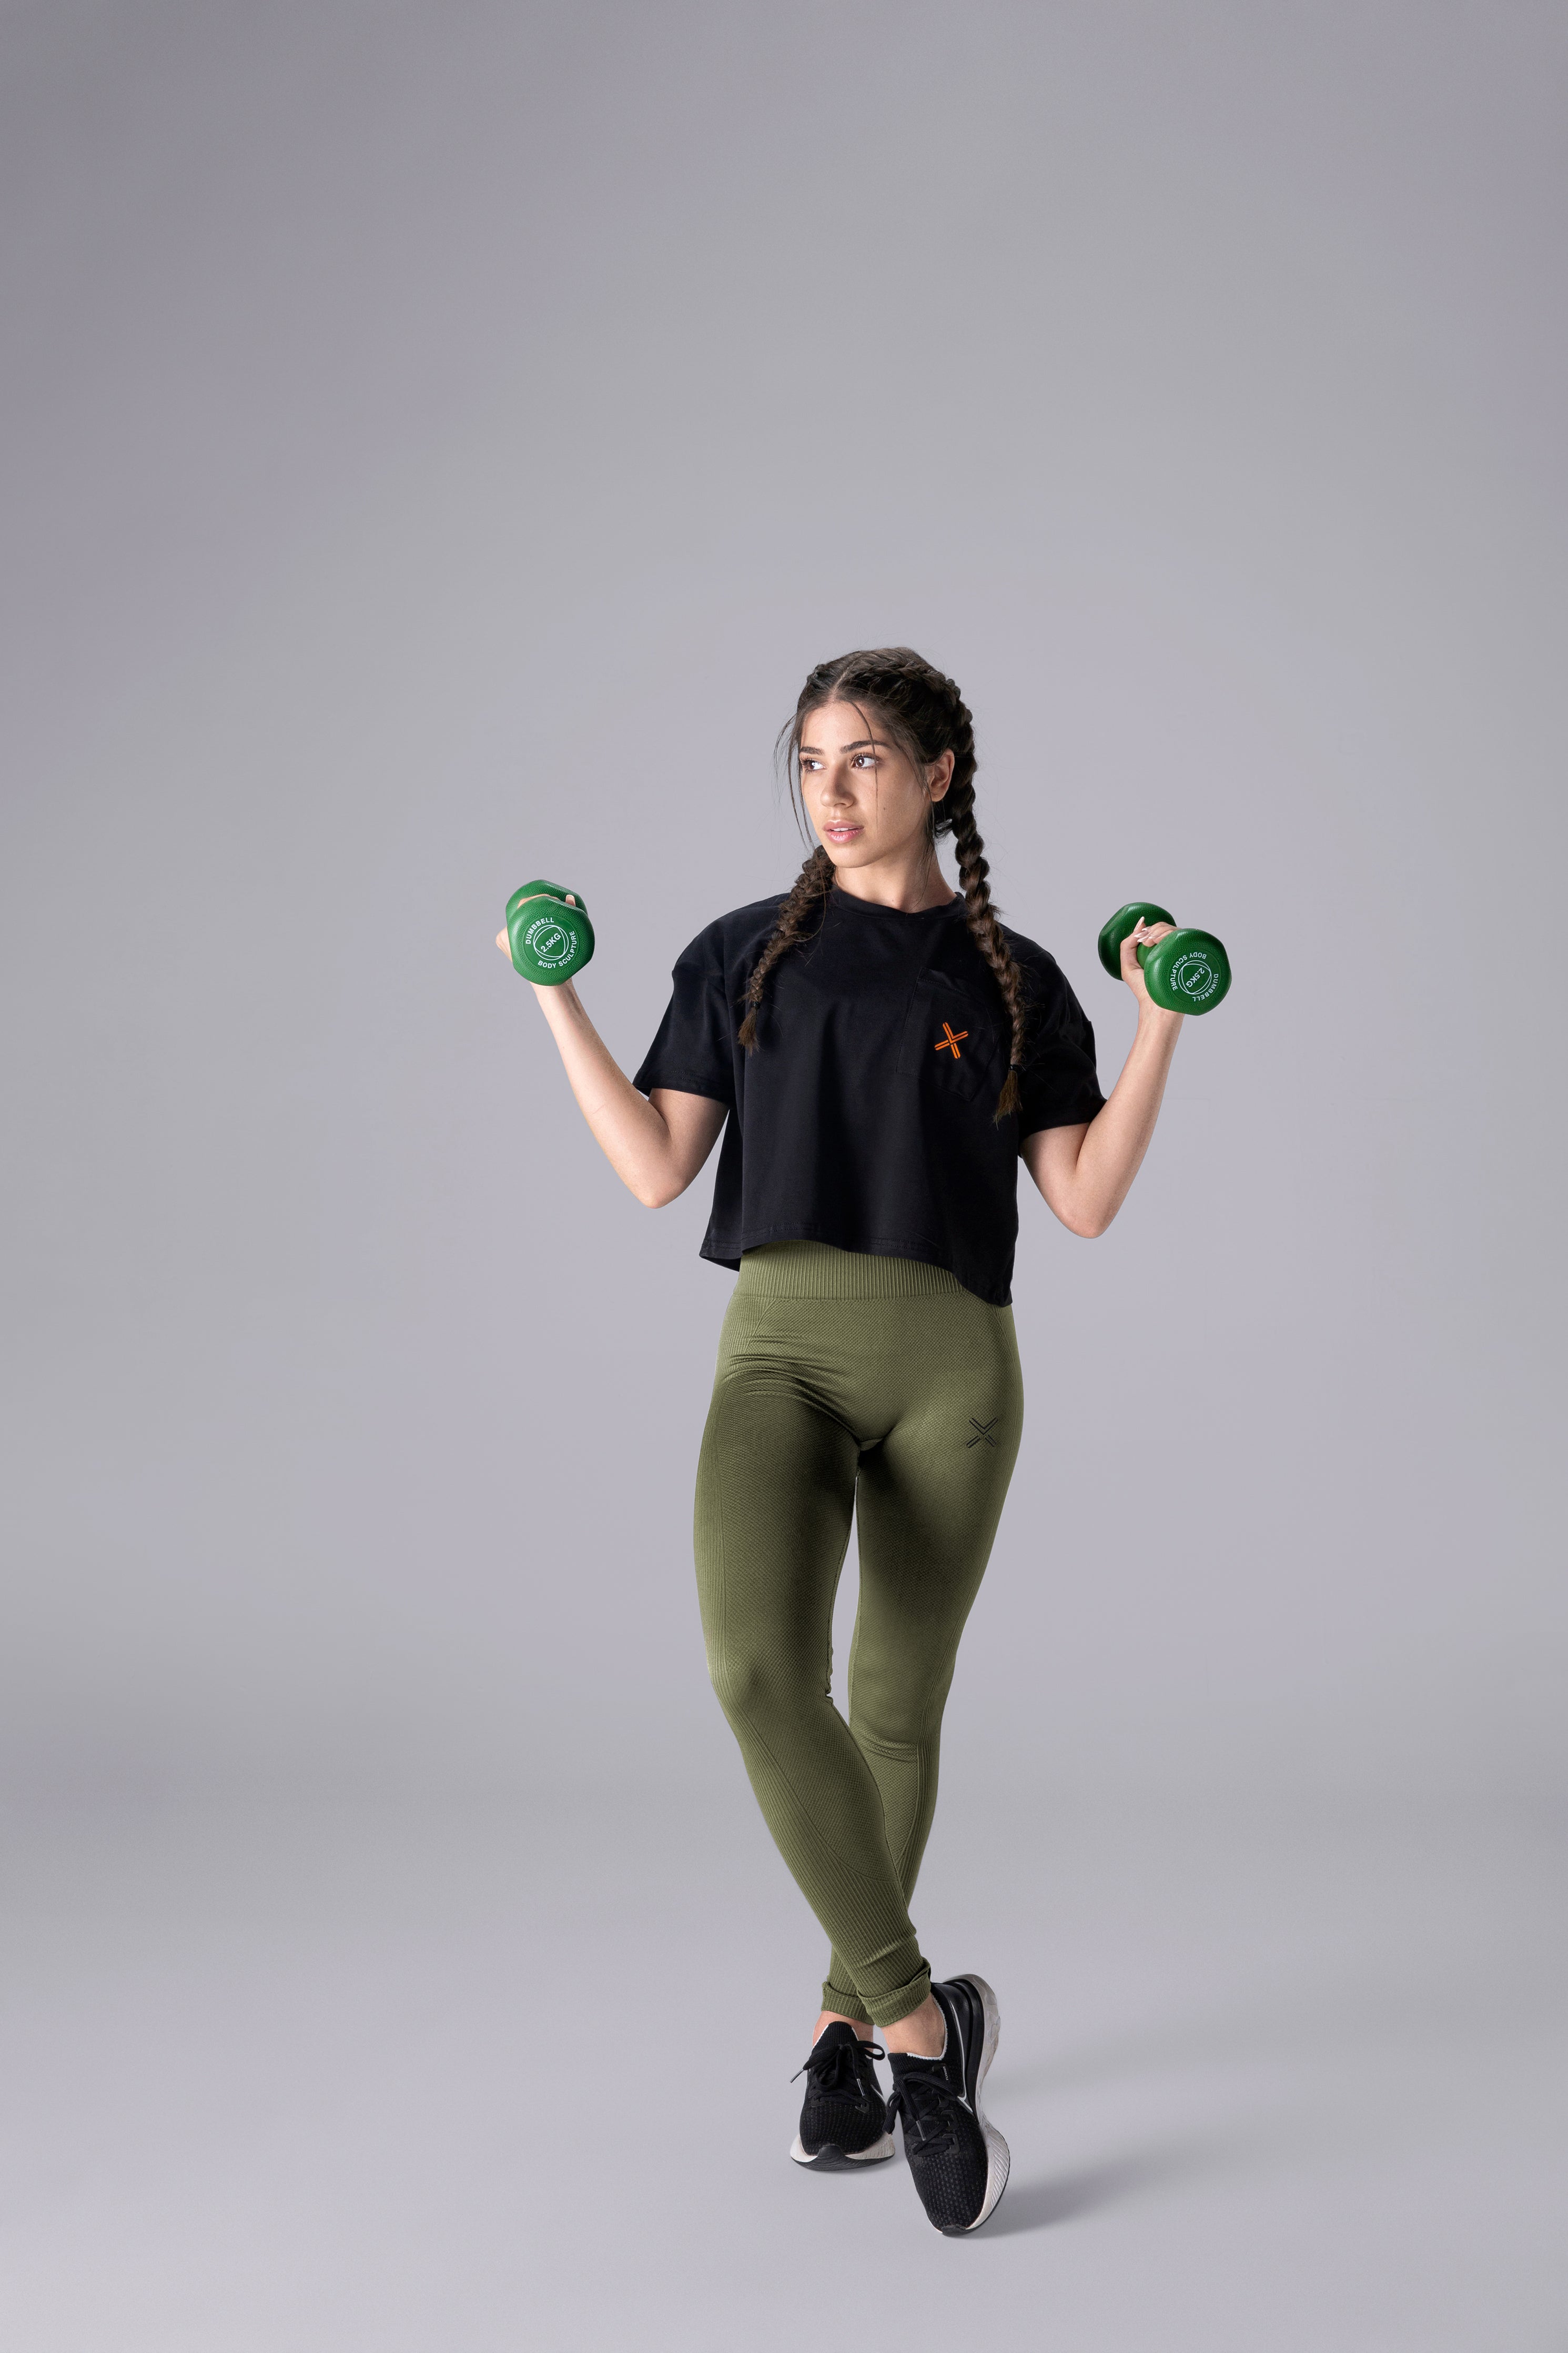 Unity Seamless Leggings in Olive - XS